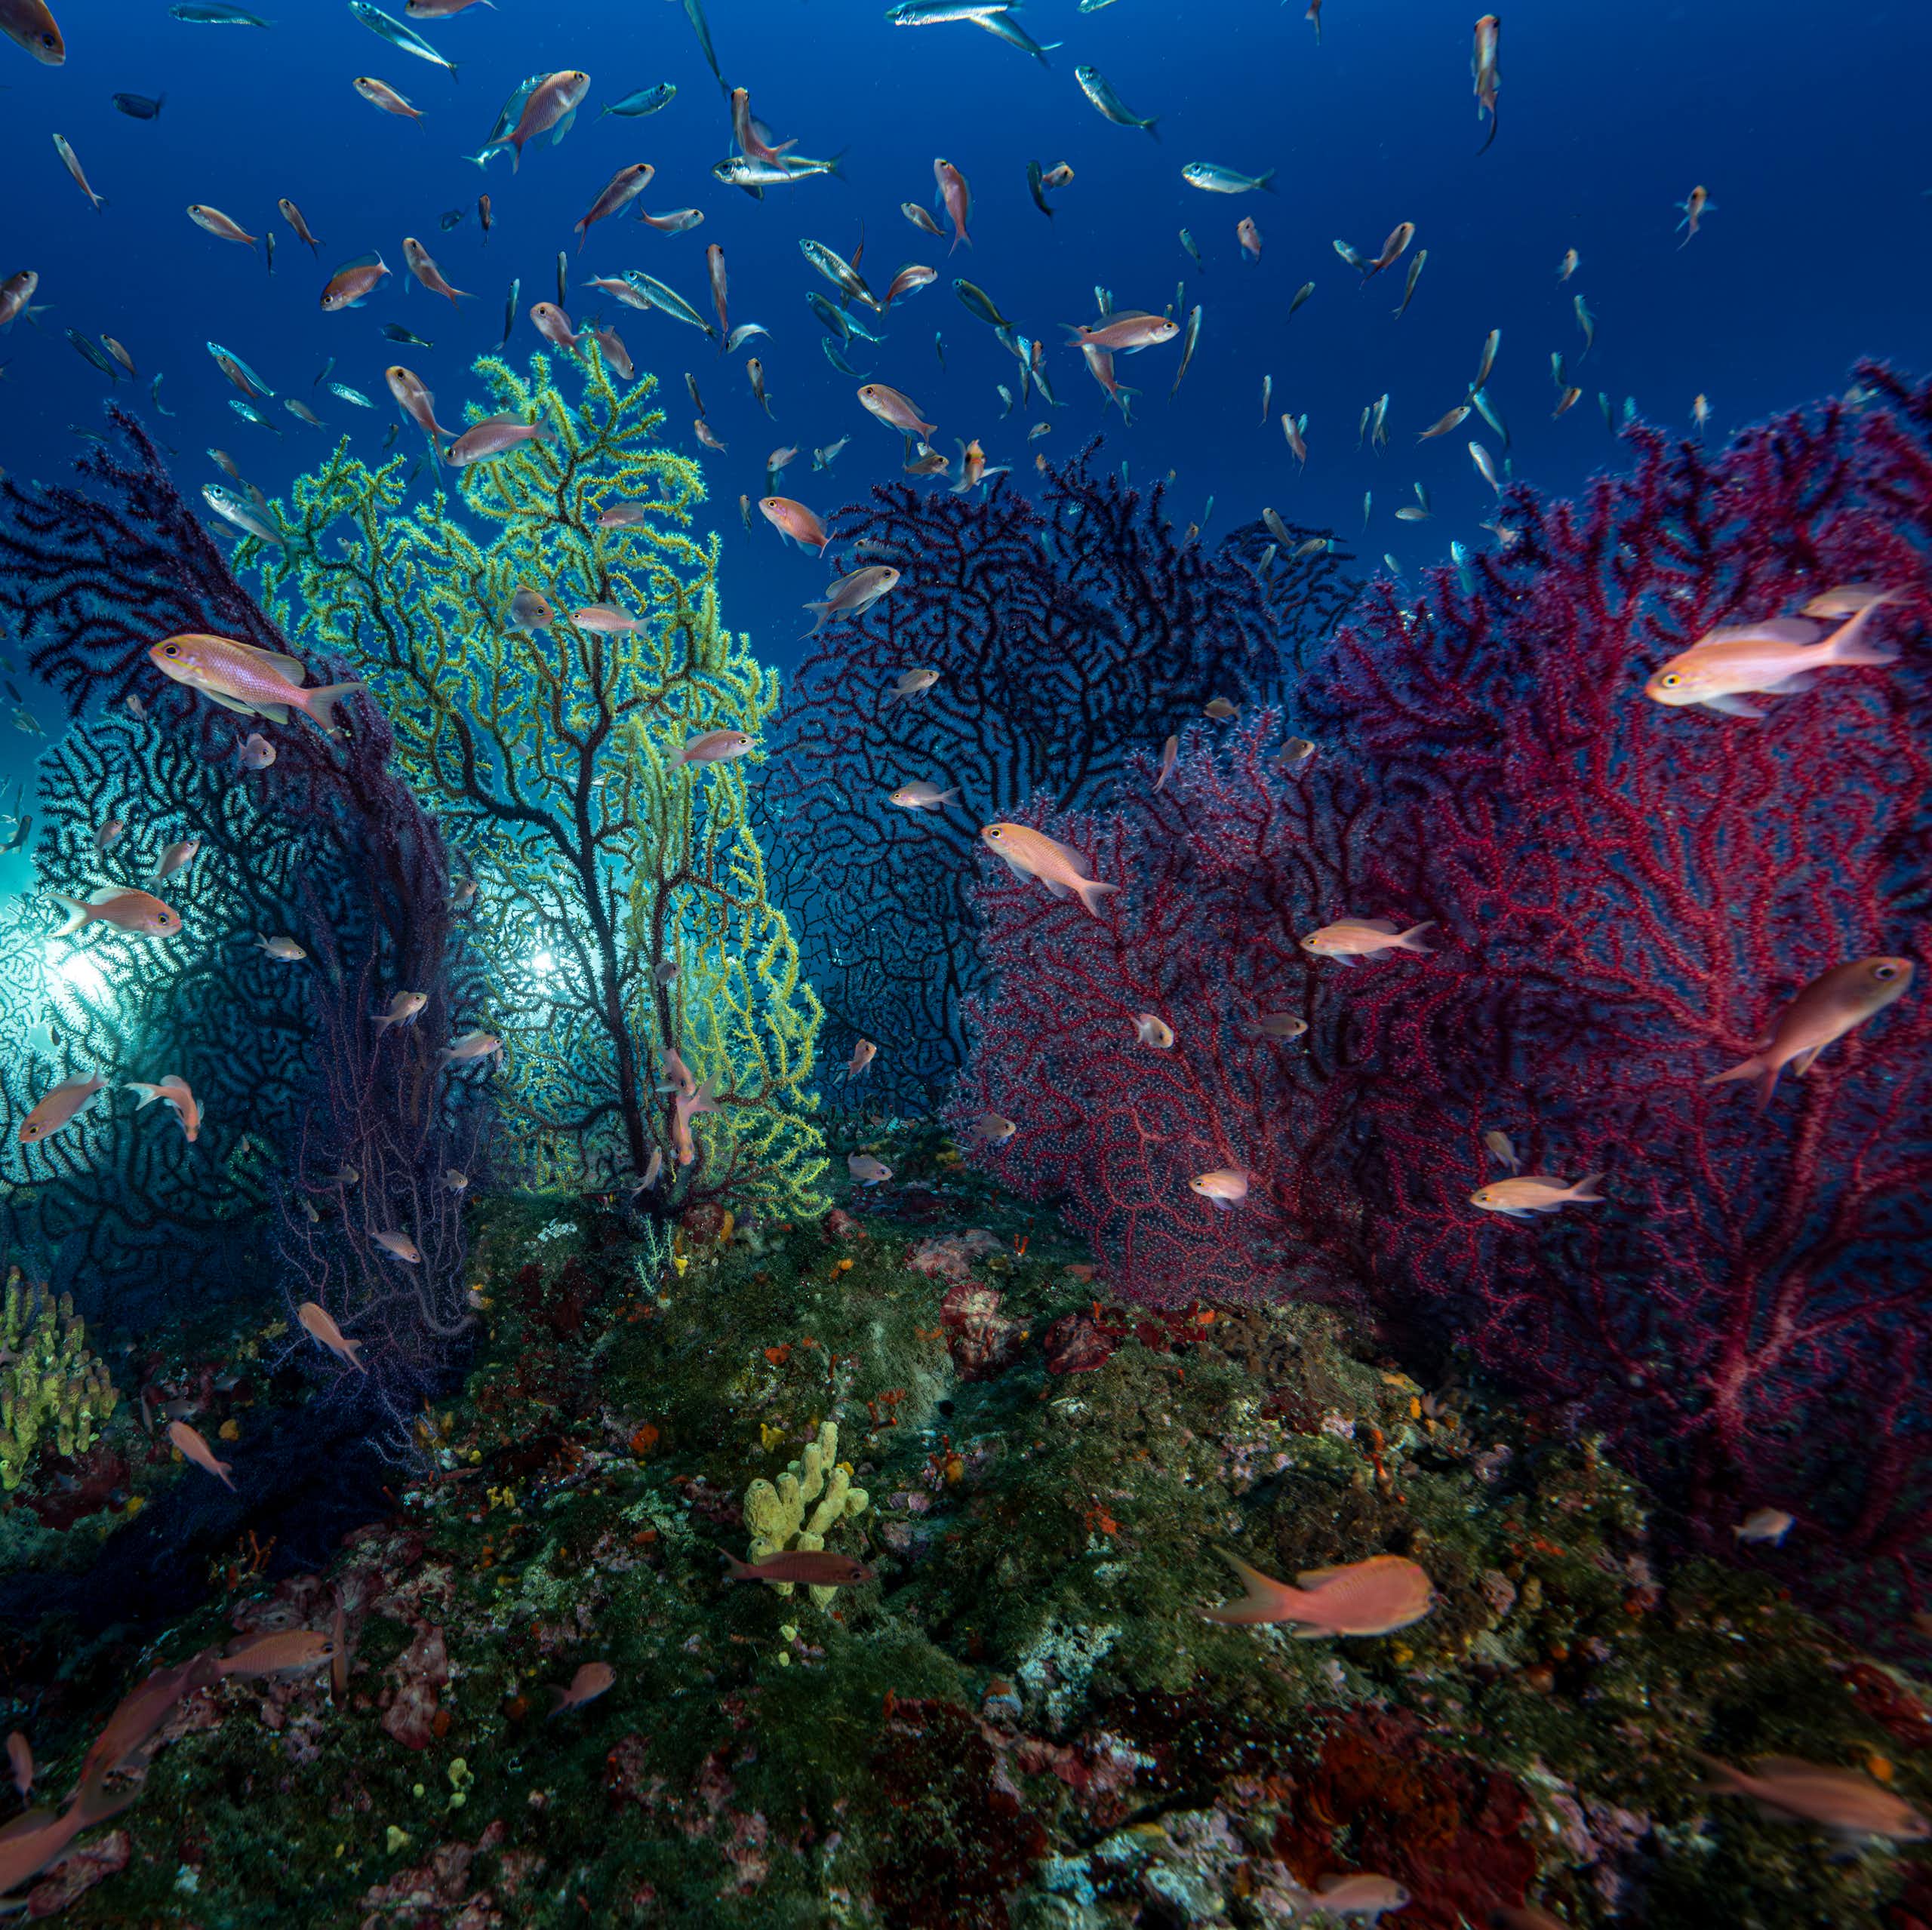 The deep Mediterraneen: a temporary refuge for gorgonian coral forests facing marine heat waves